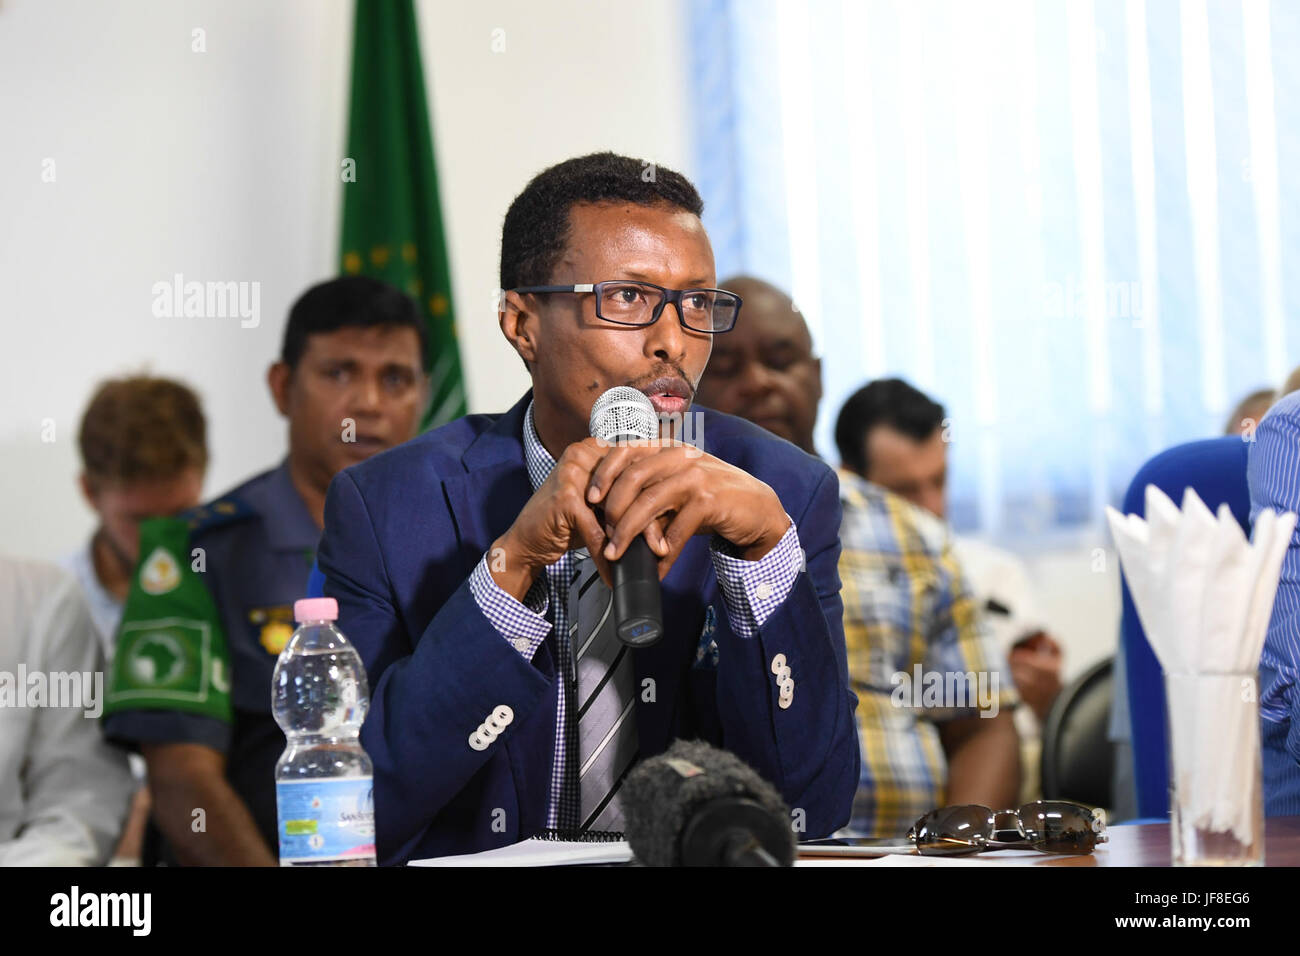 Hussein Moalim Mohamud Sheikh Ali, the National Security Advisor to the President of the Federal Government of Somalia Mohamed Abdullahi Farmaajo, speaks during a meeting of the African Union-United Nations, Federal Government of Somalia joint assessment mission in Mogadishu, Somalia on May 21, 2017. AMISOM Photo / Omar Abdisalan Stock Photo